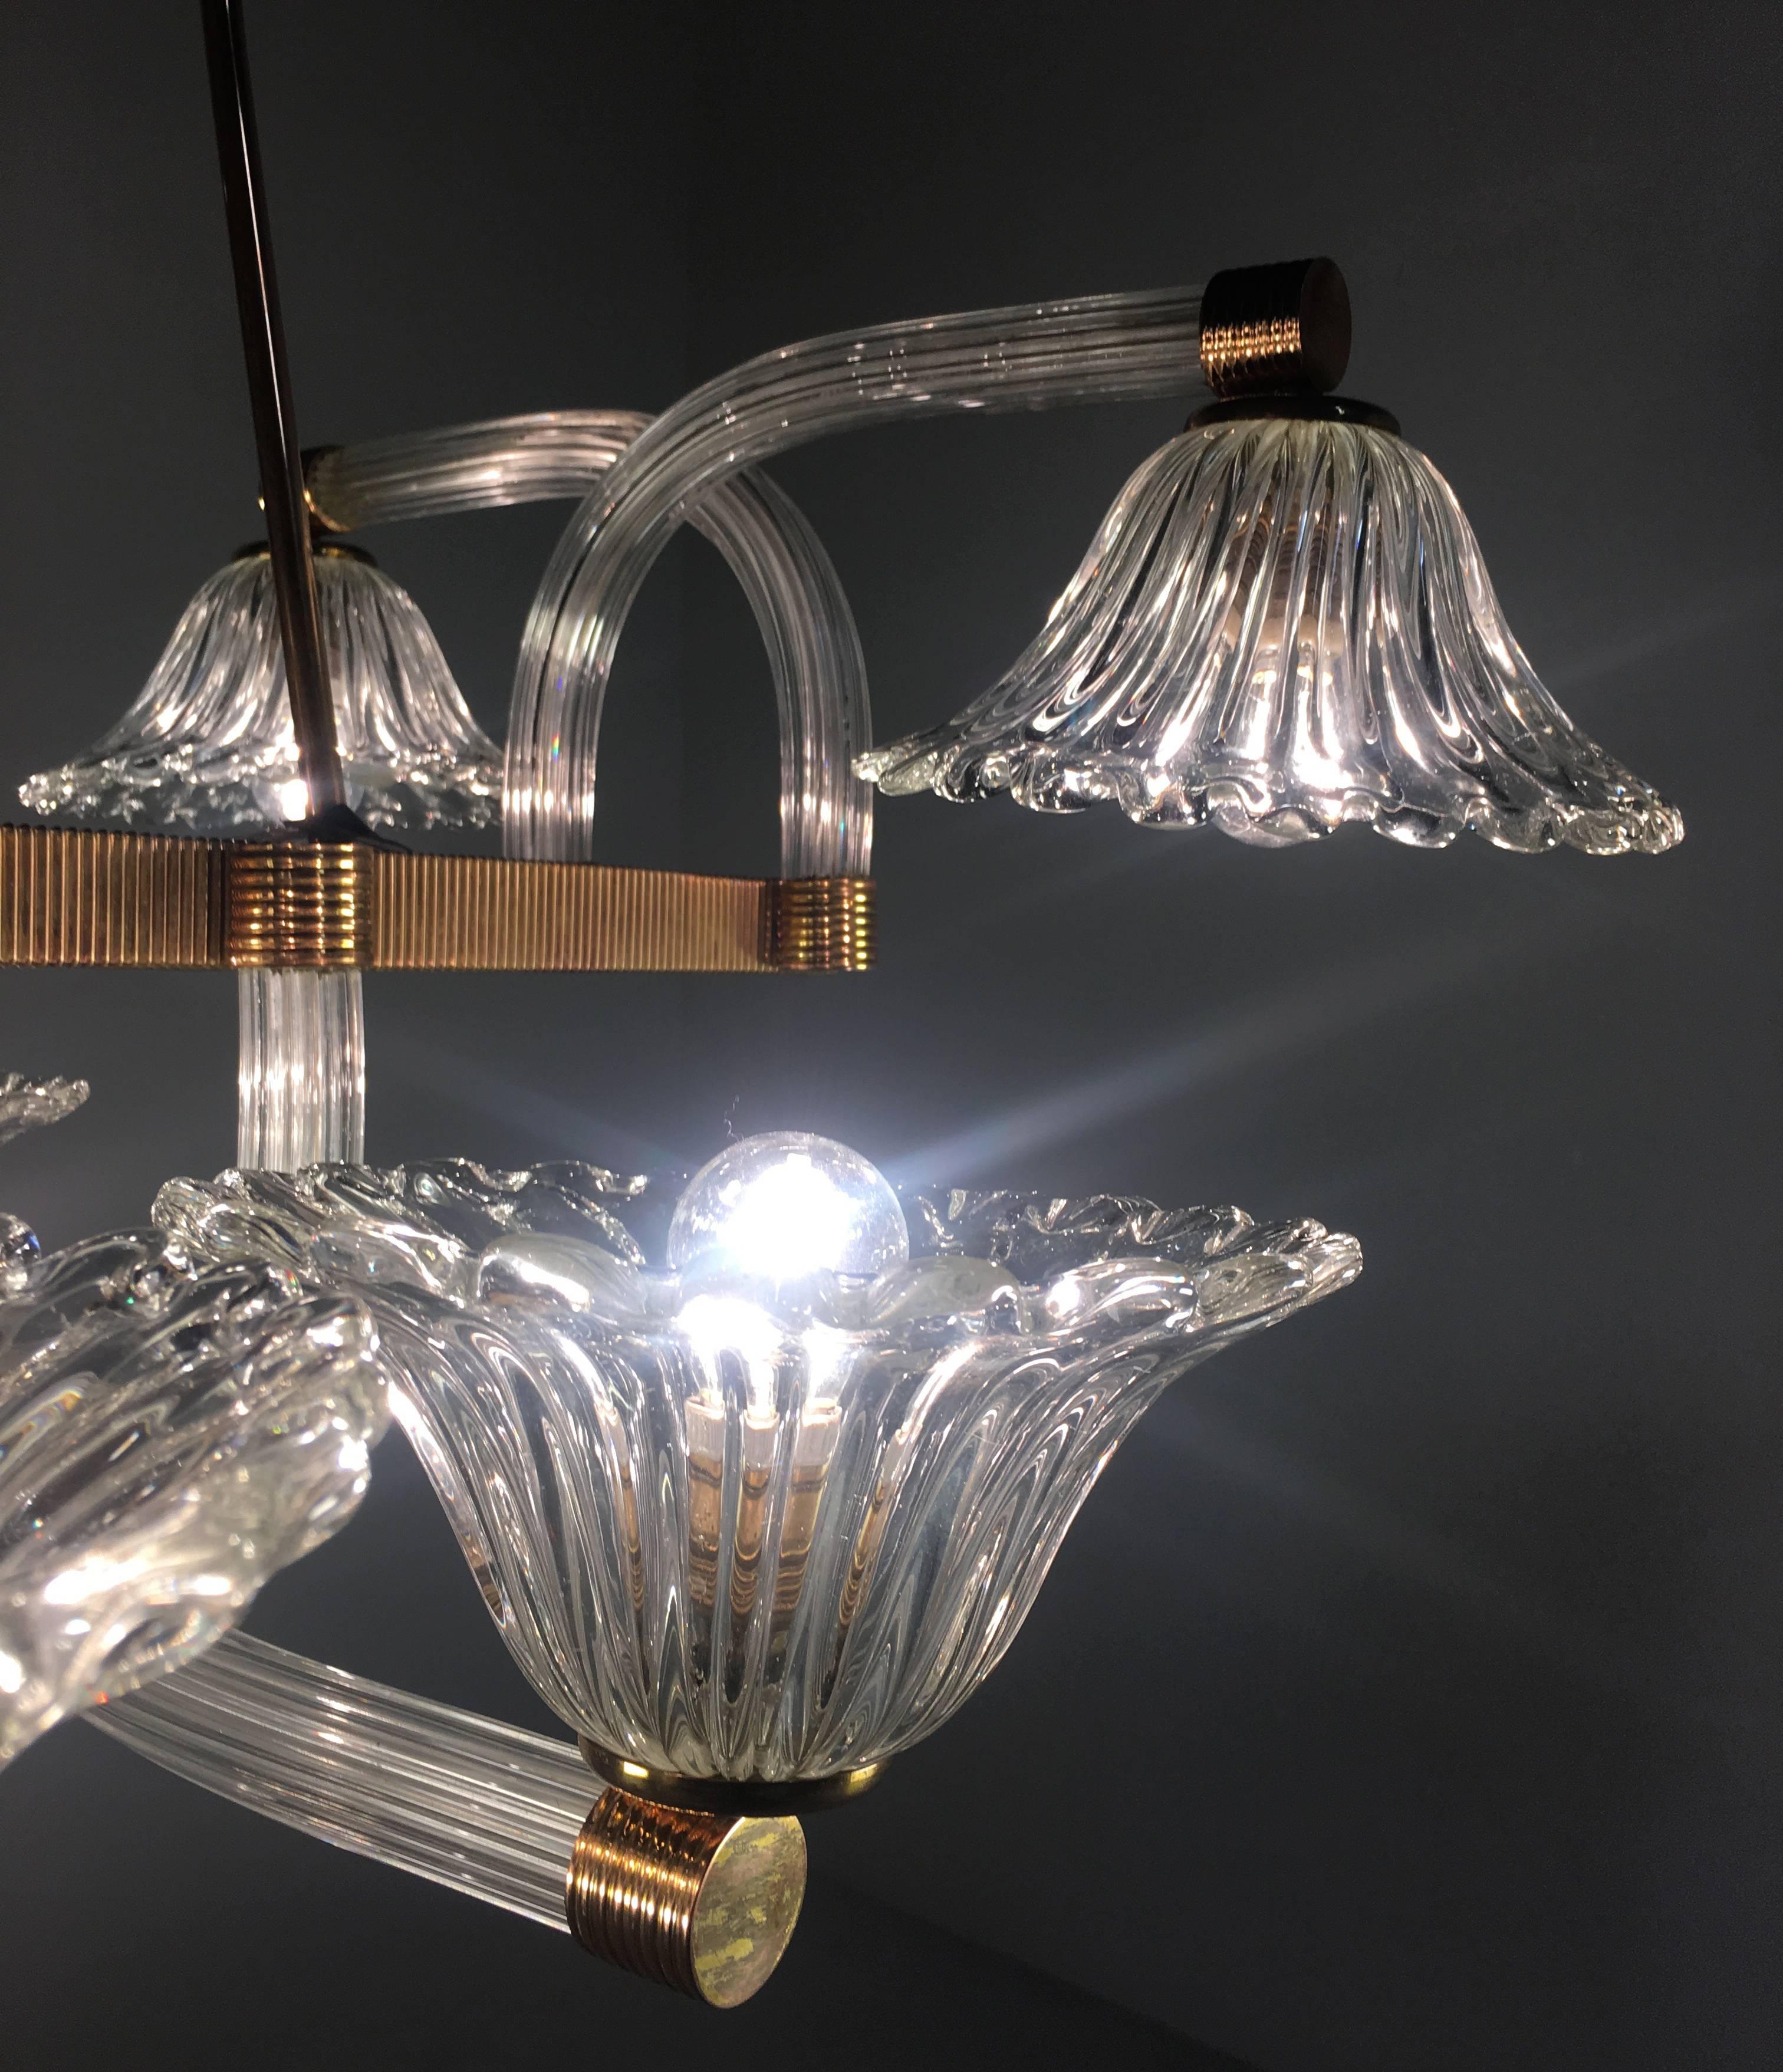 Chandelier by Barovier & Toso, Murano, 1940s 8